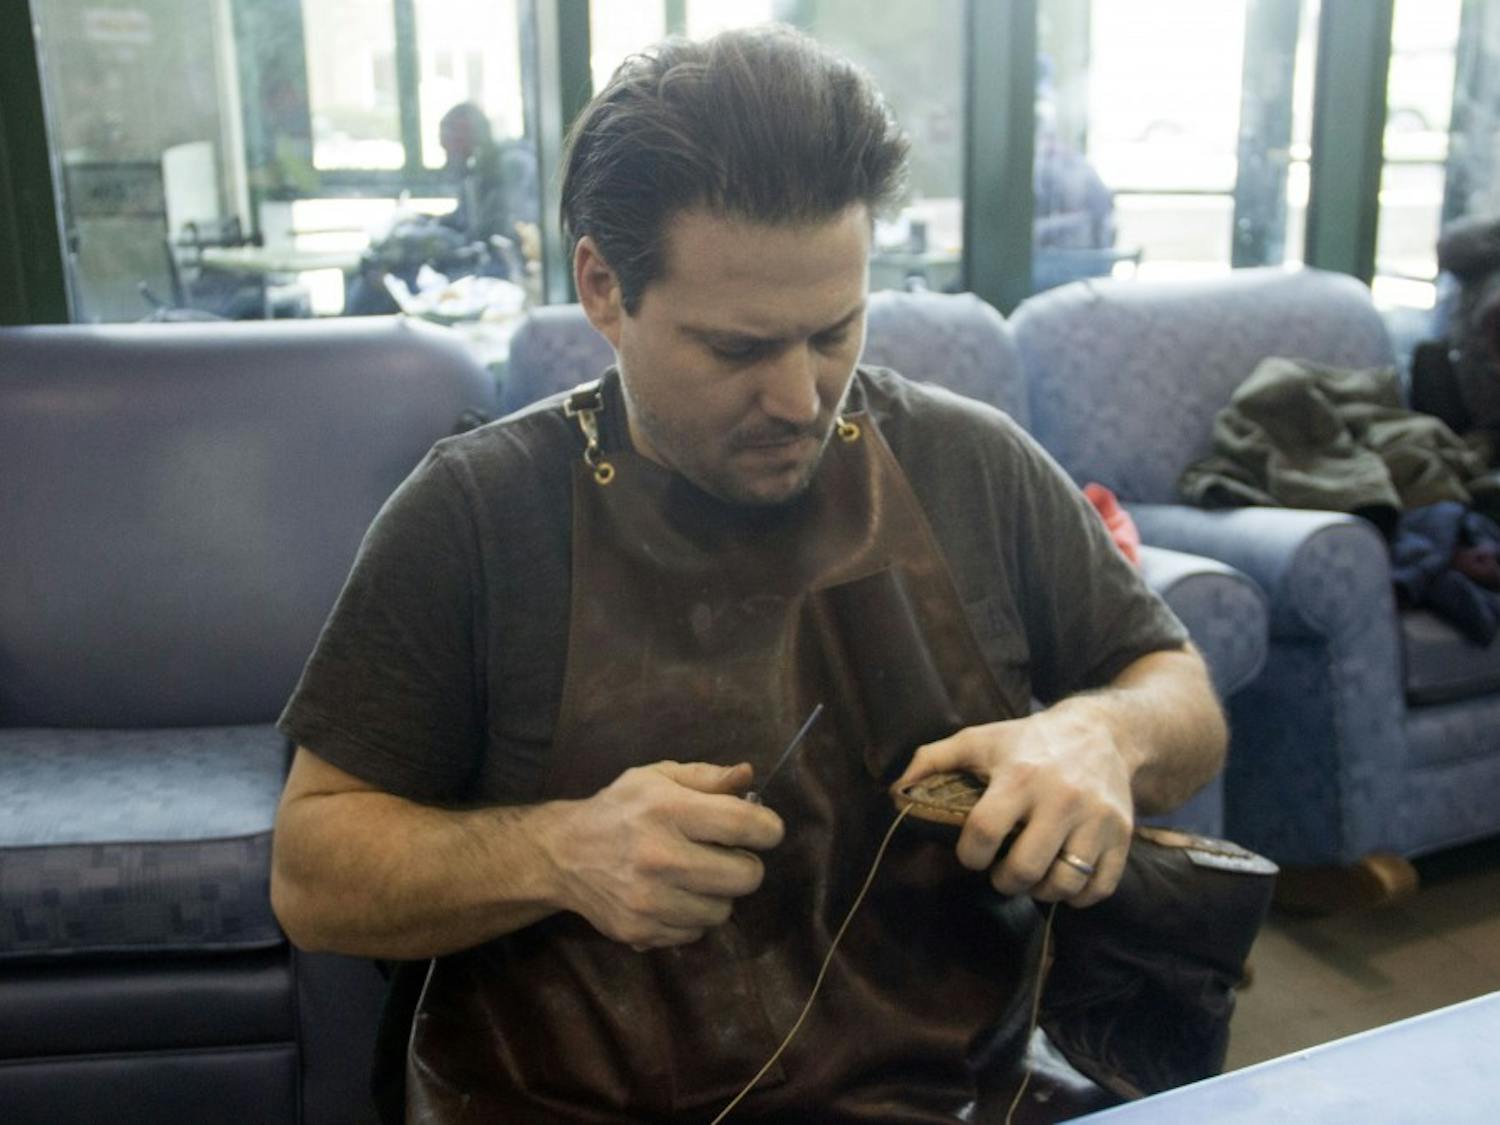 Brian “Sole Man” Gavigan repairs a shoe during the Points of Intervention (POI) tour in SU. Gavigan and other repairers aimed to fix everything from watches to laptops at this year’s fair.